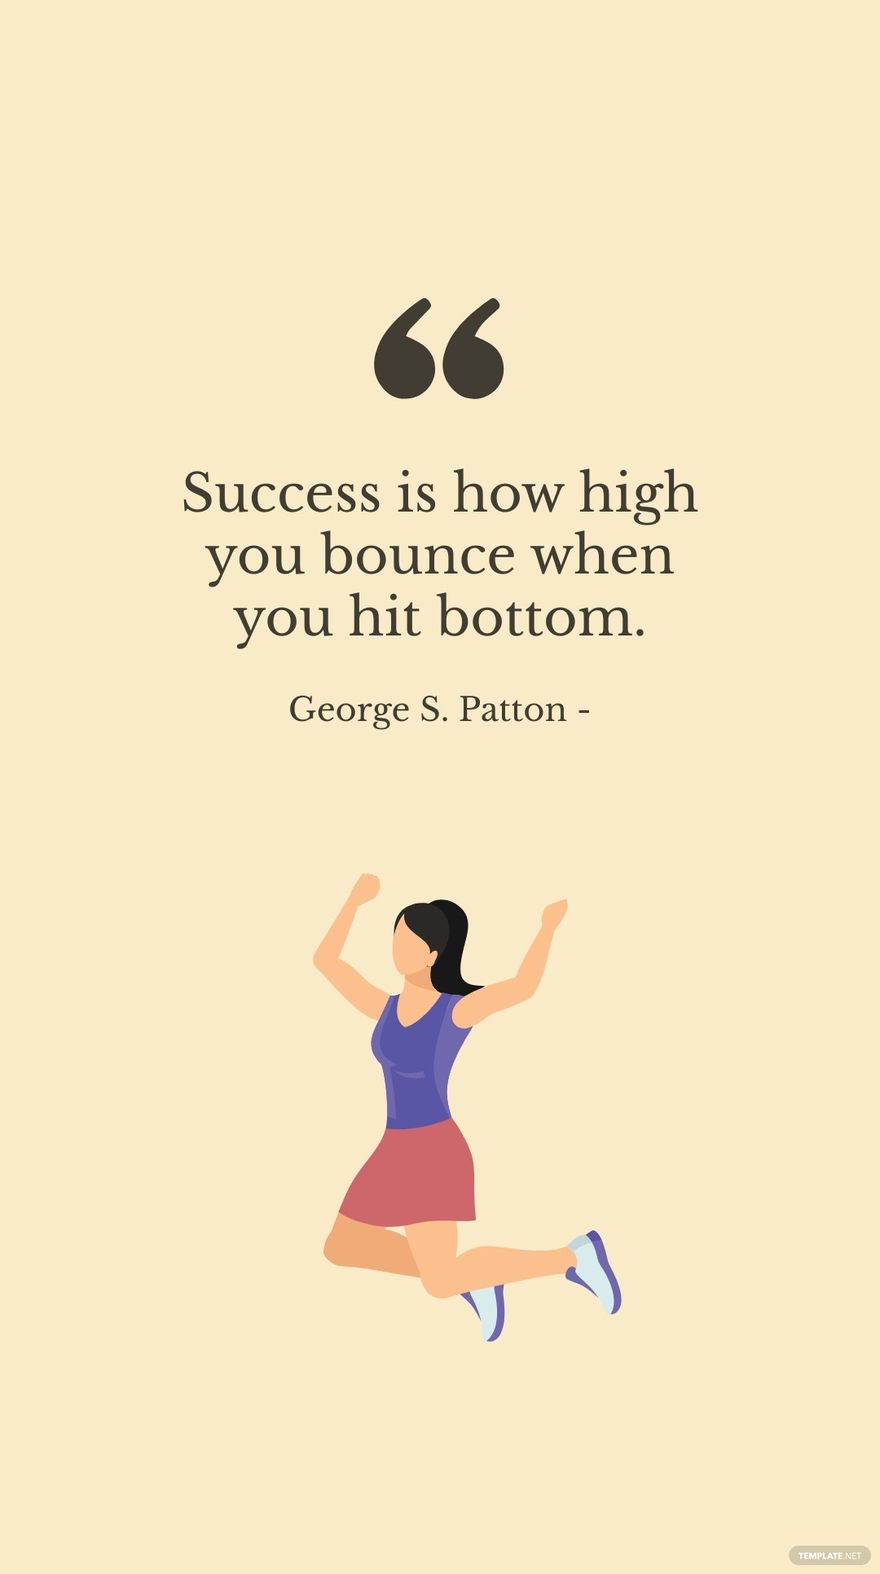 Free George S. Patton - Success is how high you bounce when you hit bottom. in JPG